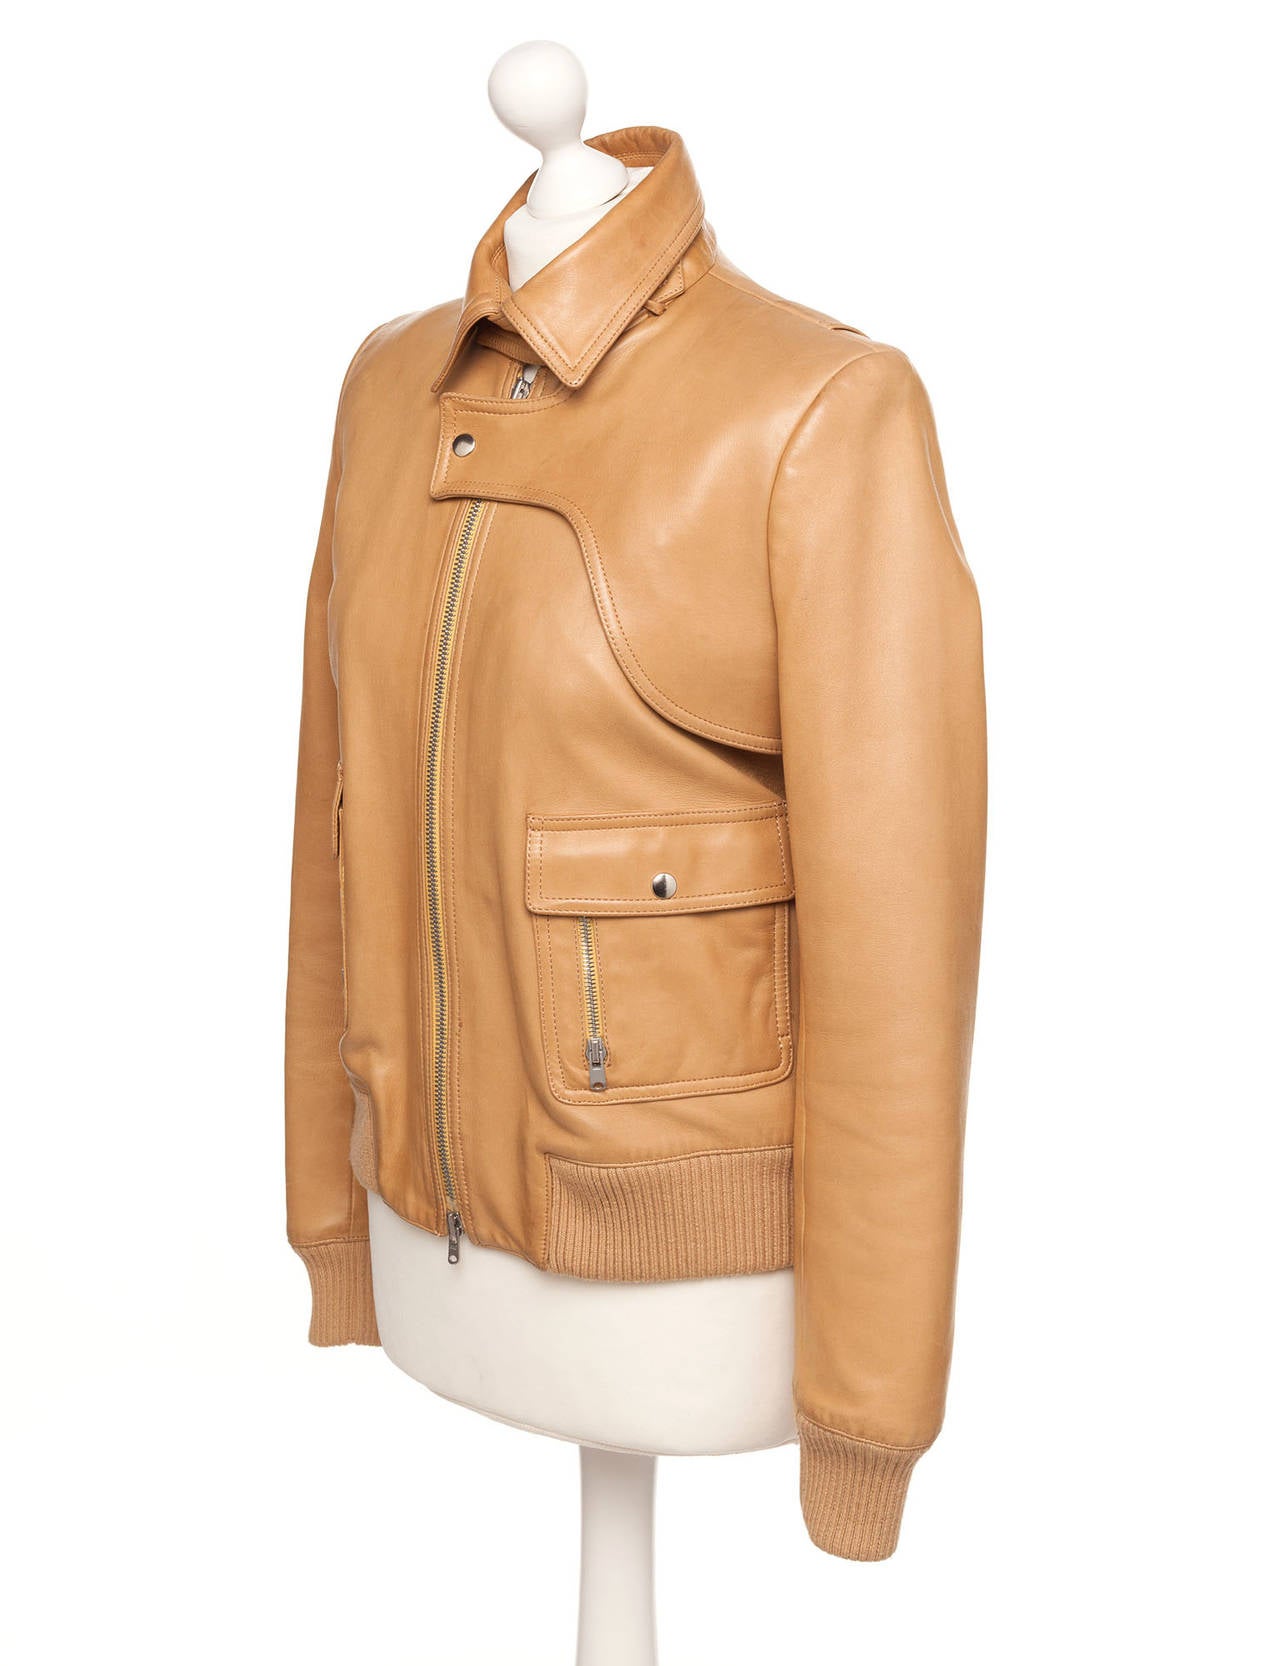 Jacket is of pure quality, multiple details, zipper, front flap closures, butter soft leather. A timeless classic from Chloe.